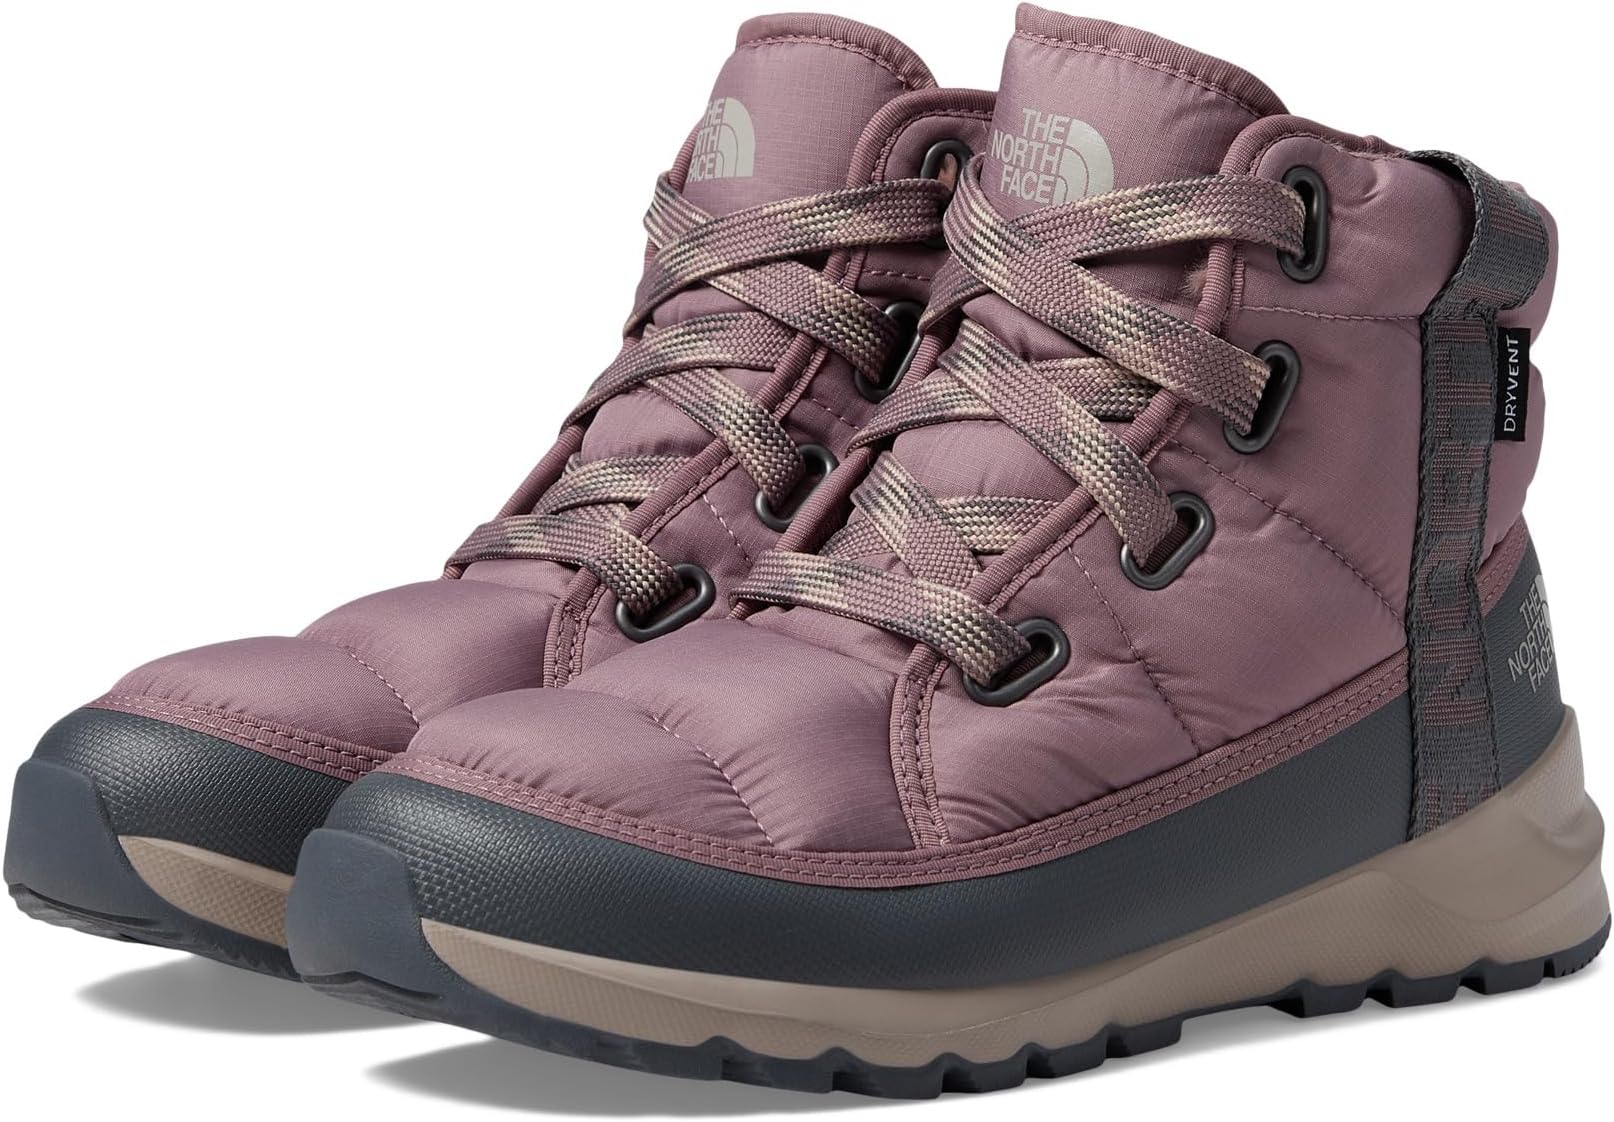 Зимние ботинки ThermoBall Lace-Up Luxe WP The North Face, цвет Fawn Grey/Asphalt Grey